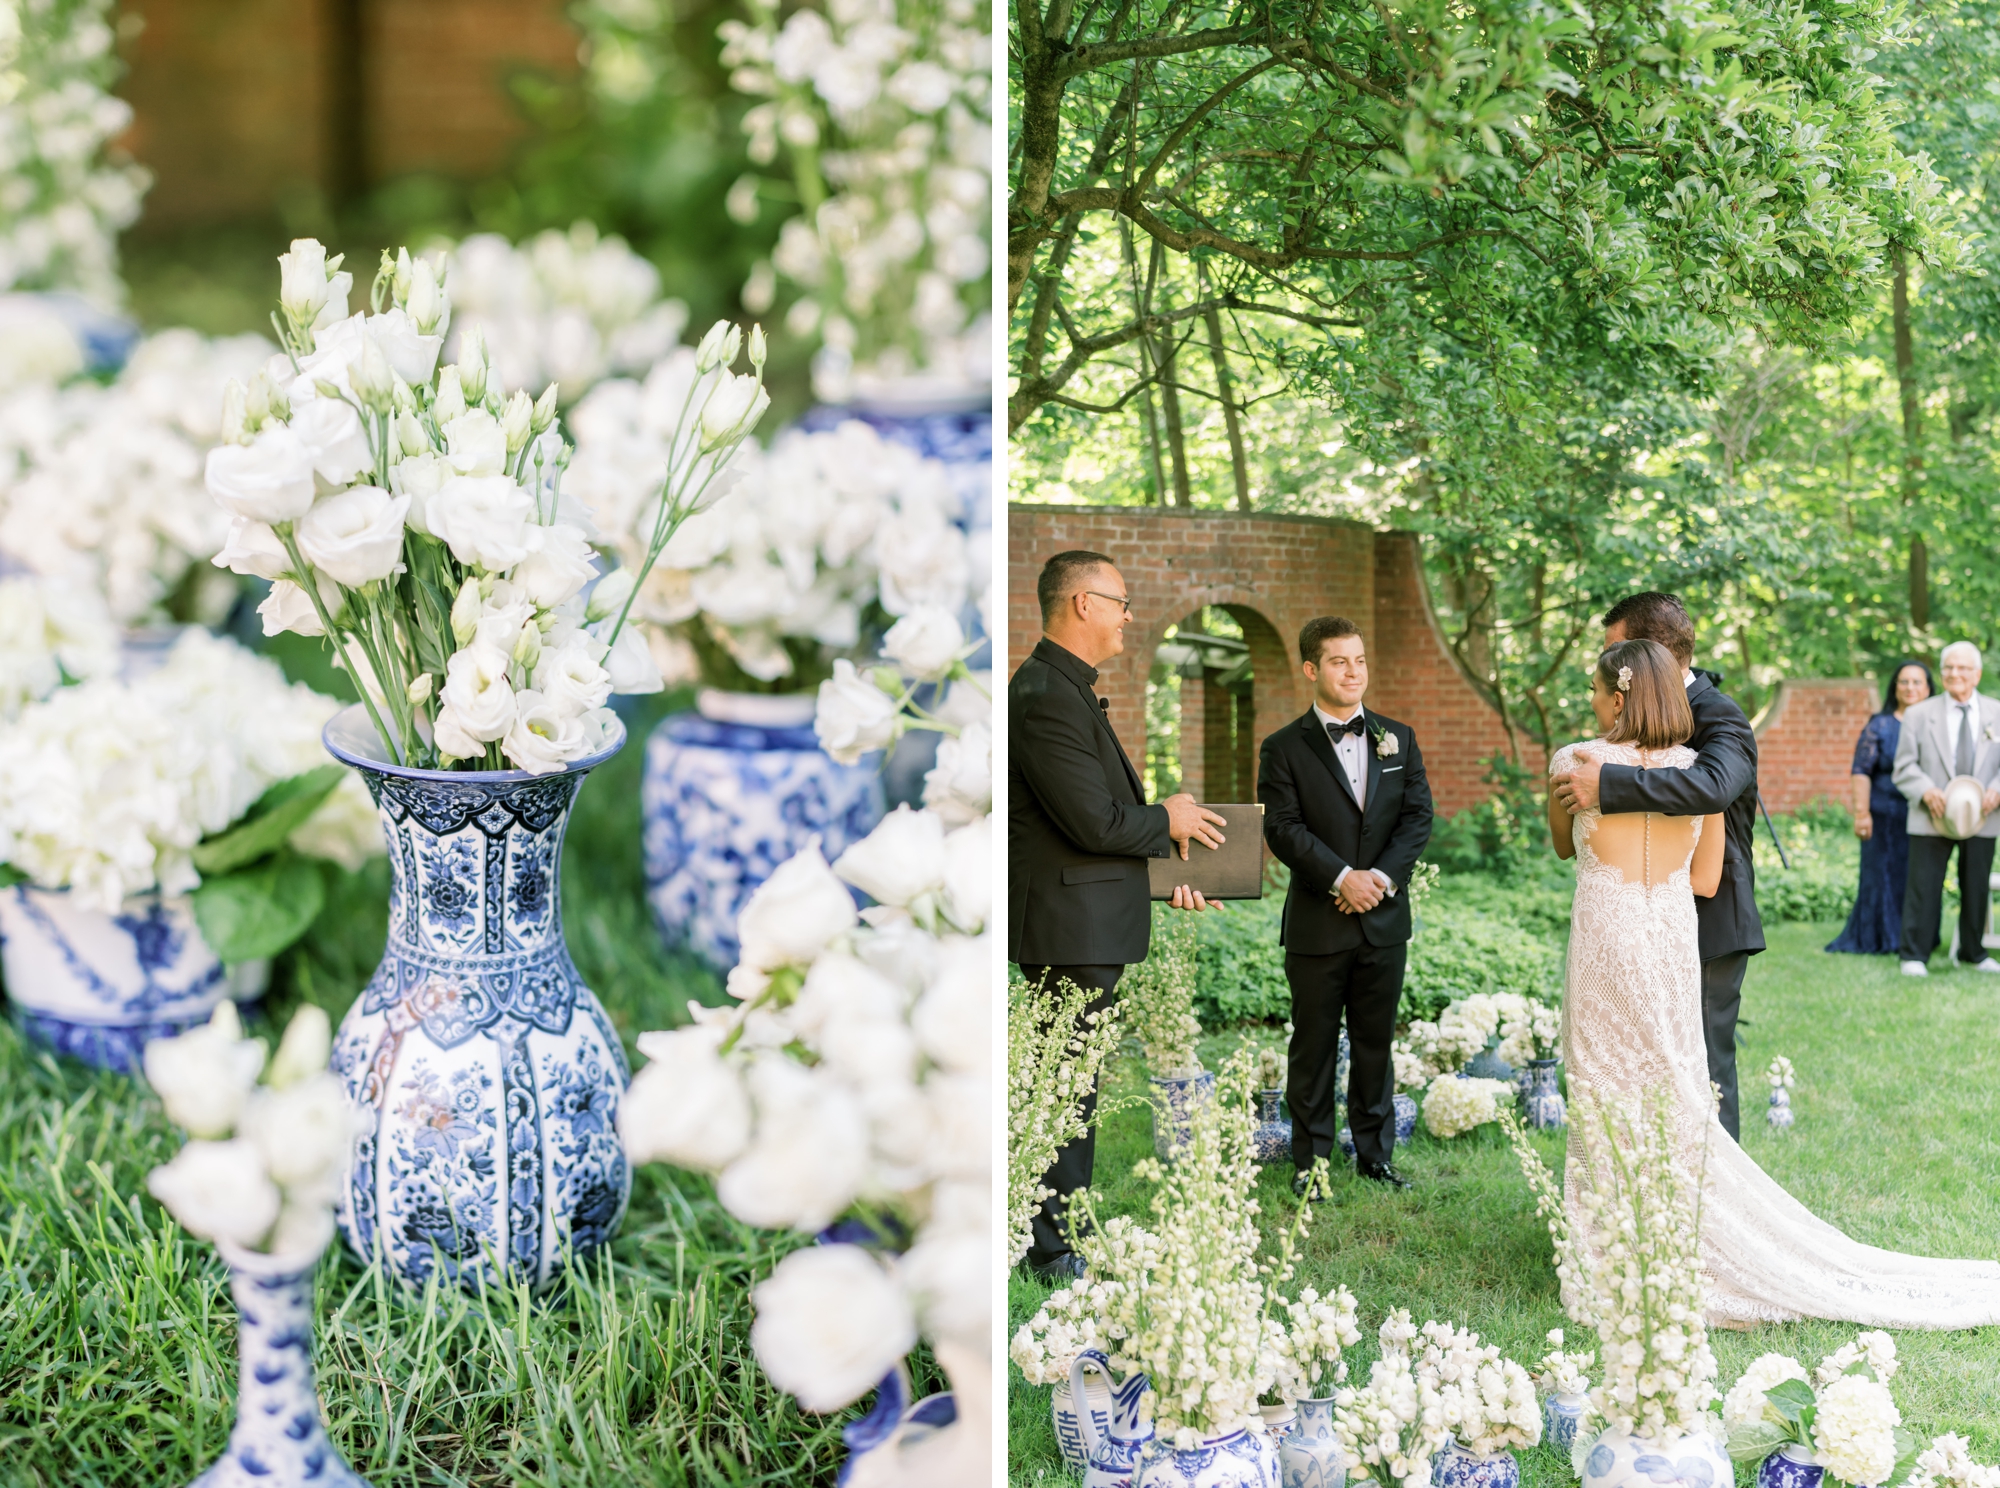 Roots Floral provided gorgeous florals for the Cincinnati wedding